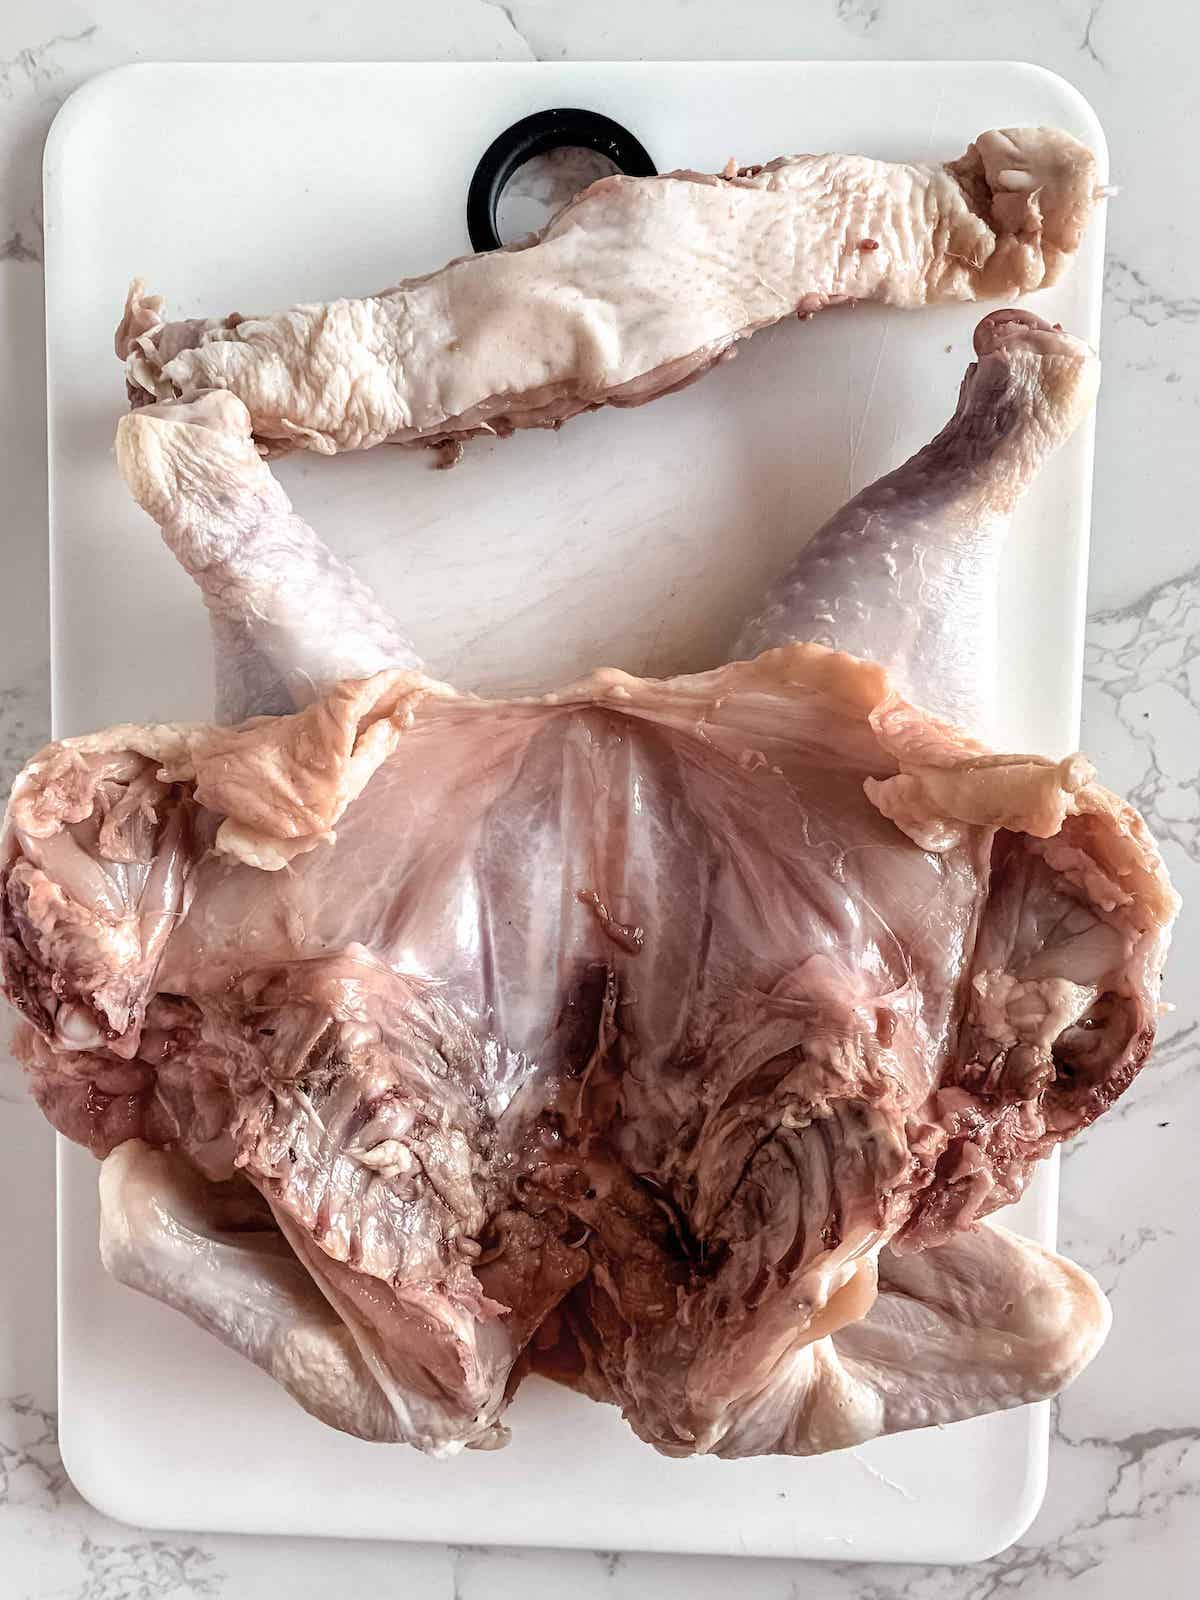 Whole raw chicken with backbone removed.